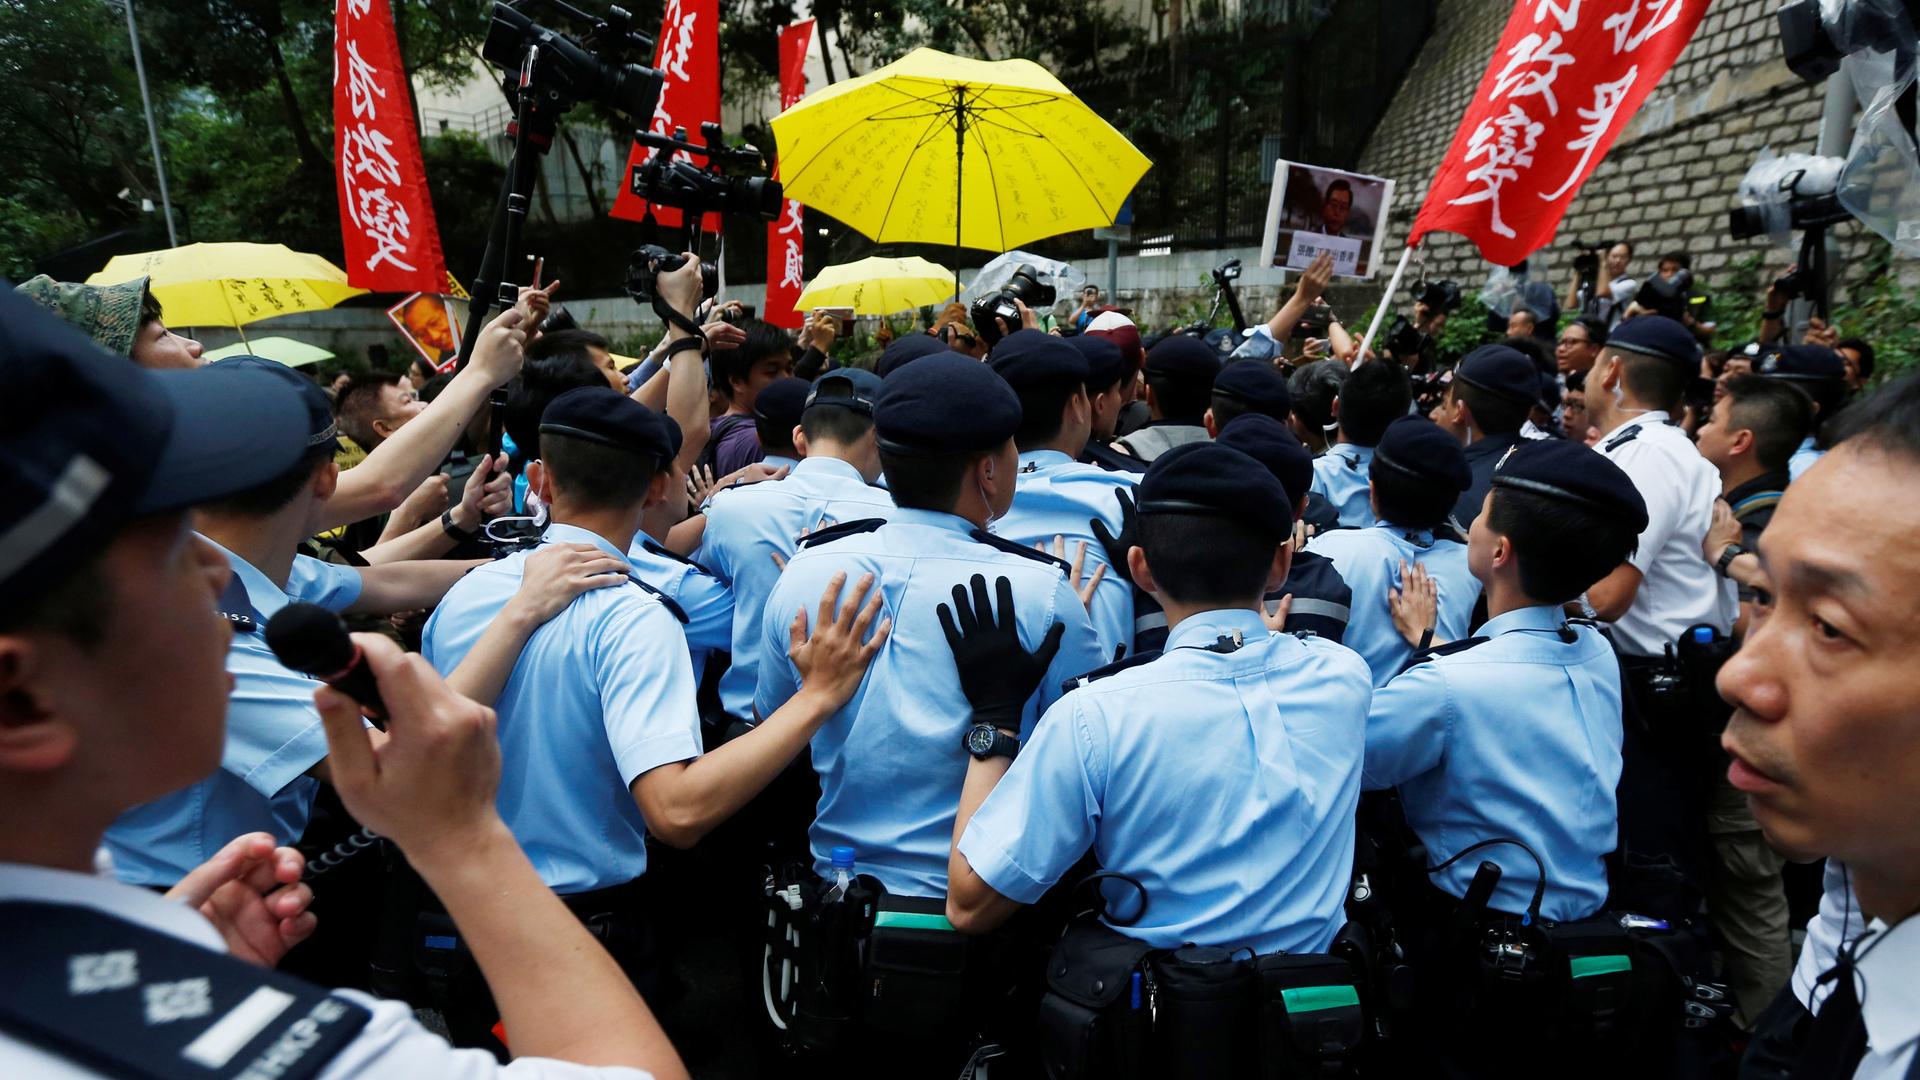 Police officers block protesters during a demonstration in Hong Kong against a visit by a top official from Beijing